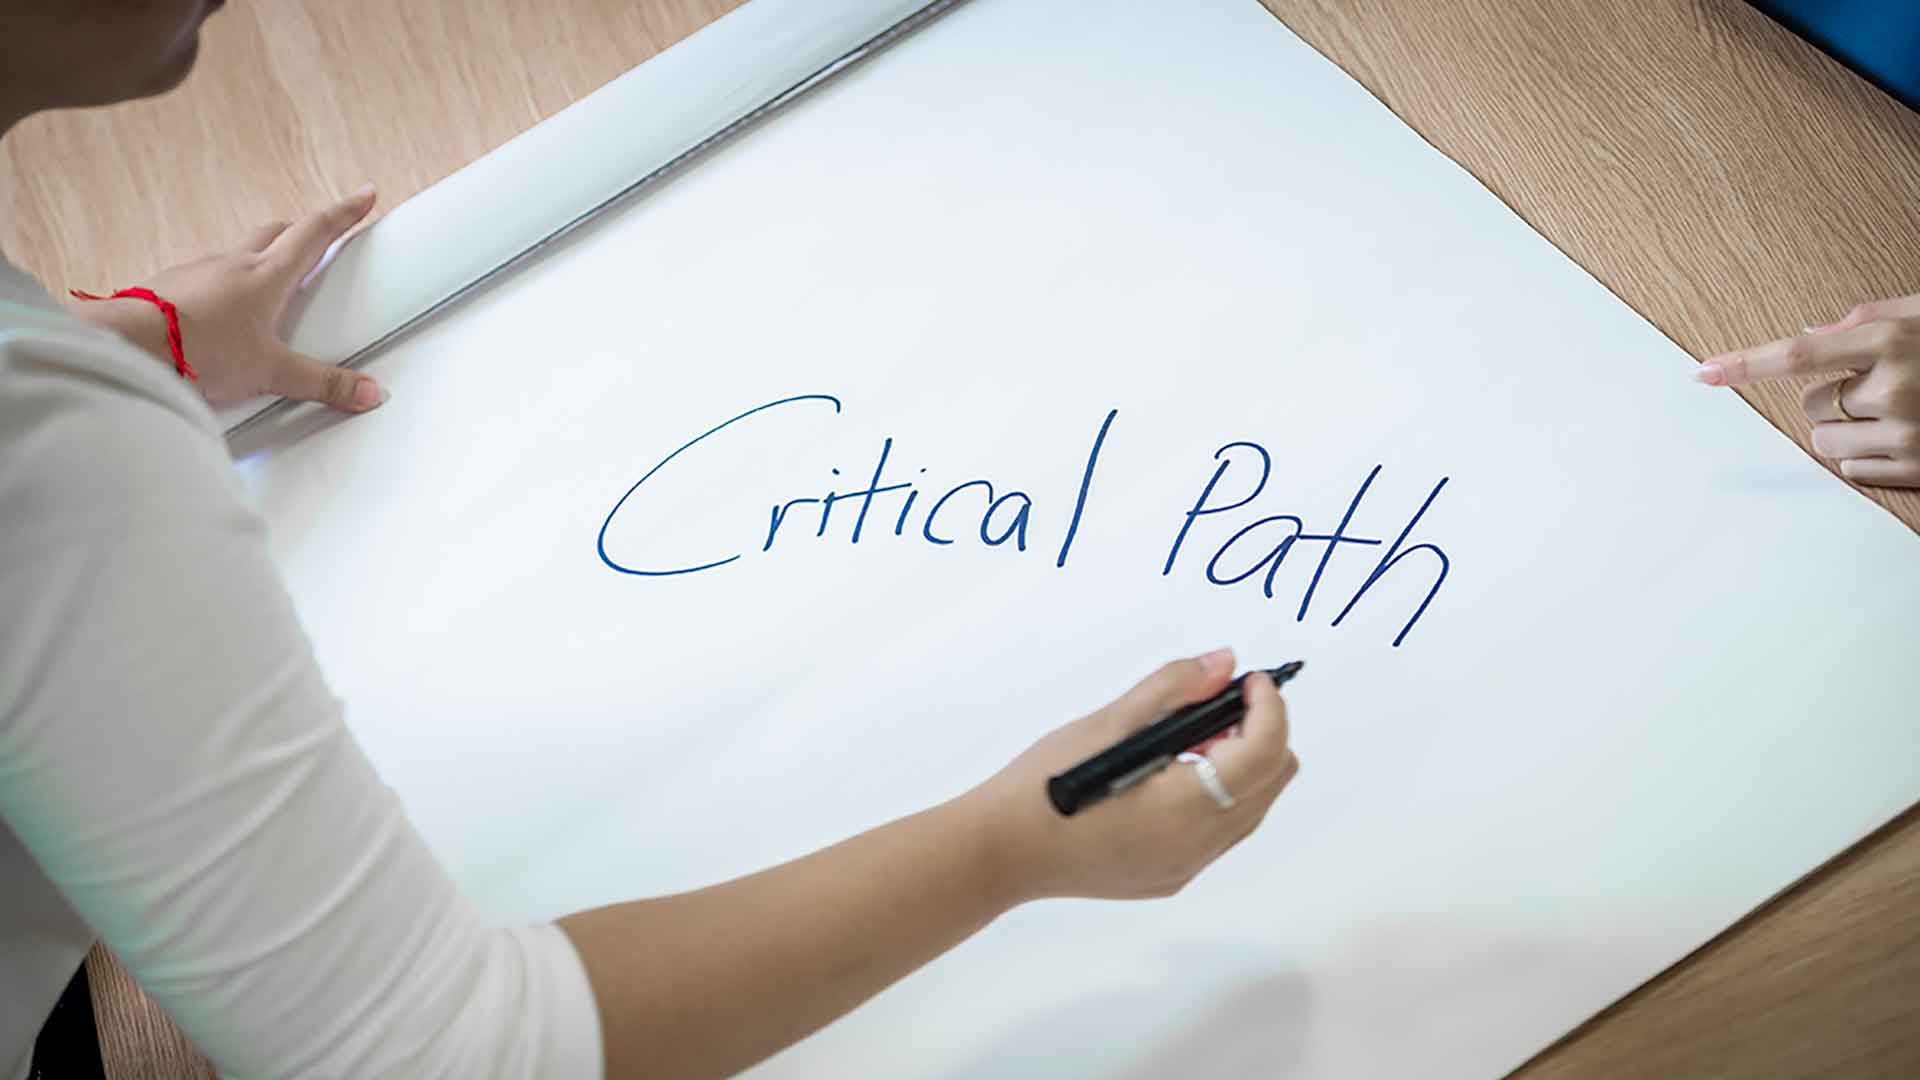 student writing critical path on white board 